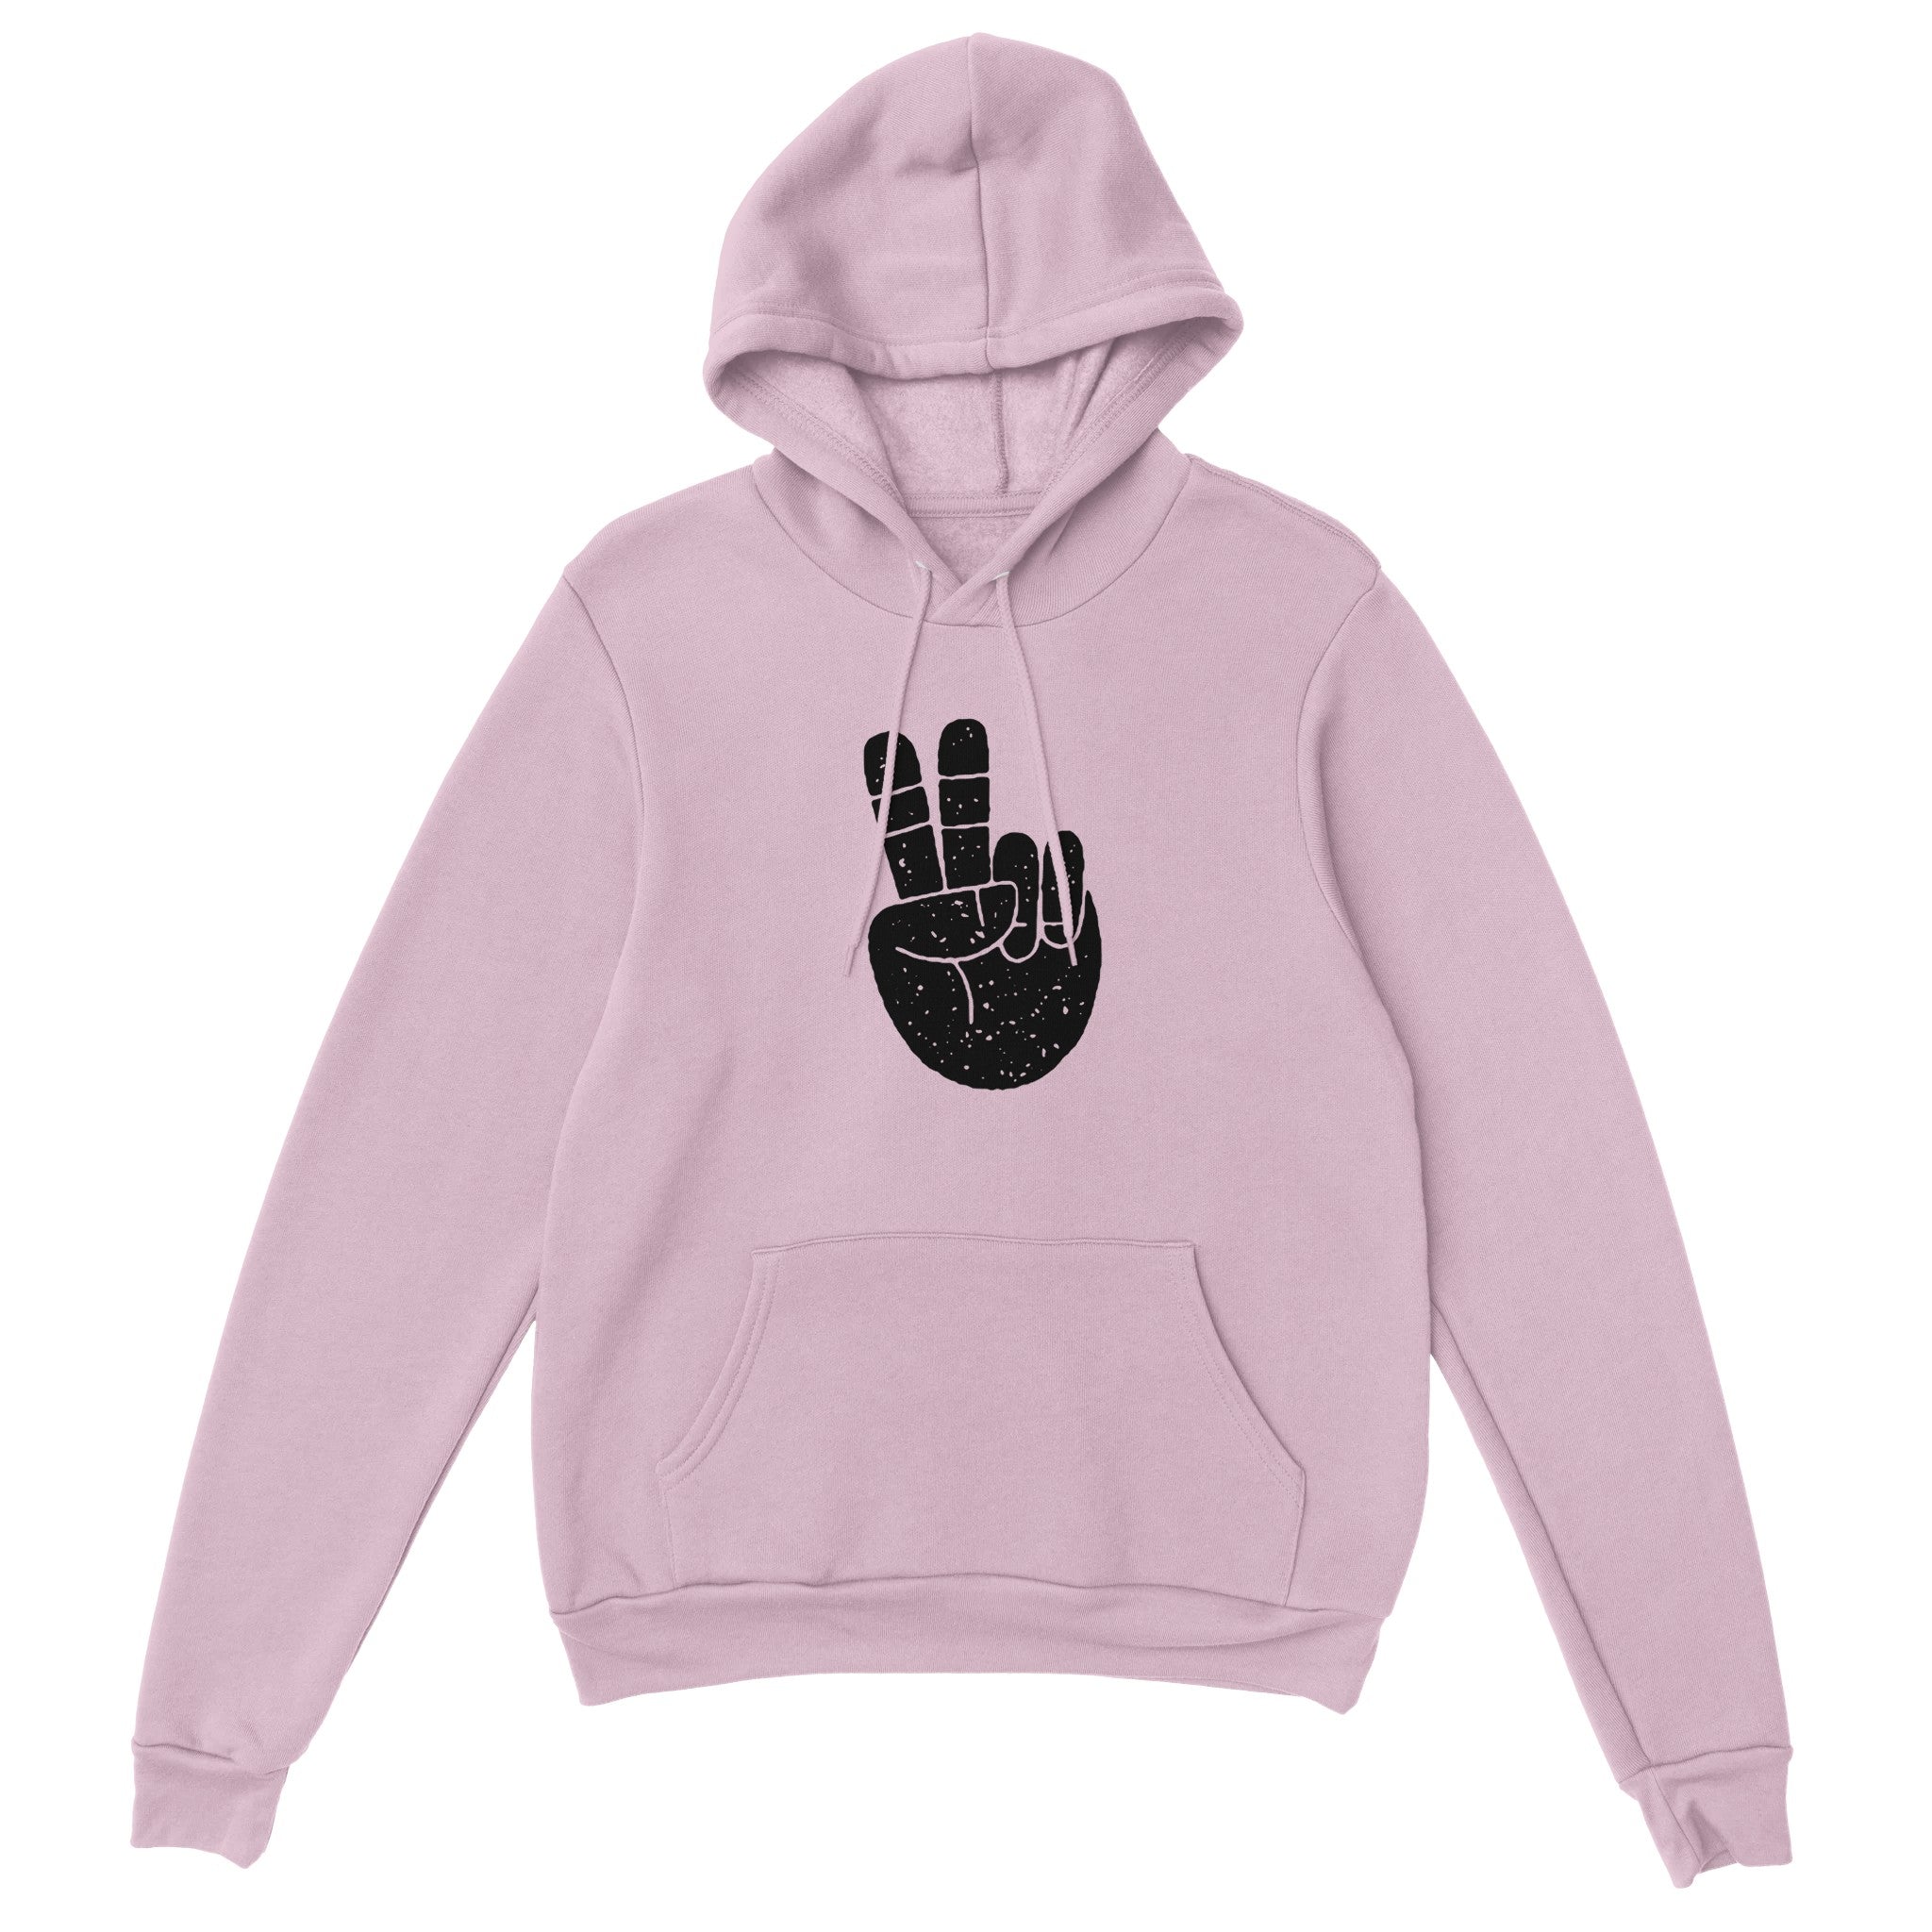 PEACE OUT Pullover Hoodie - Optimalprint